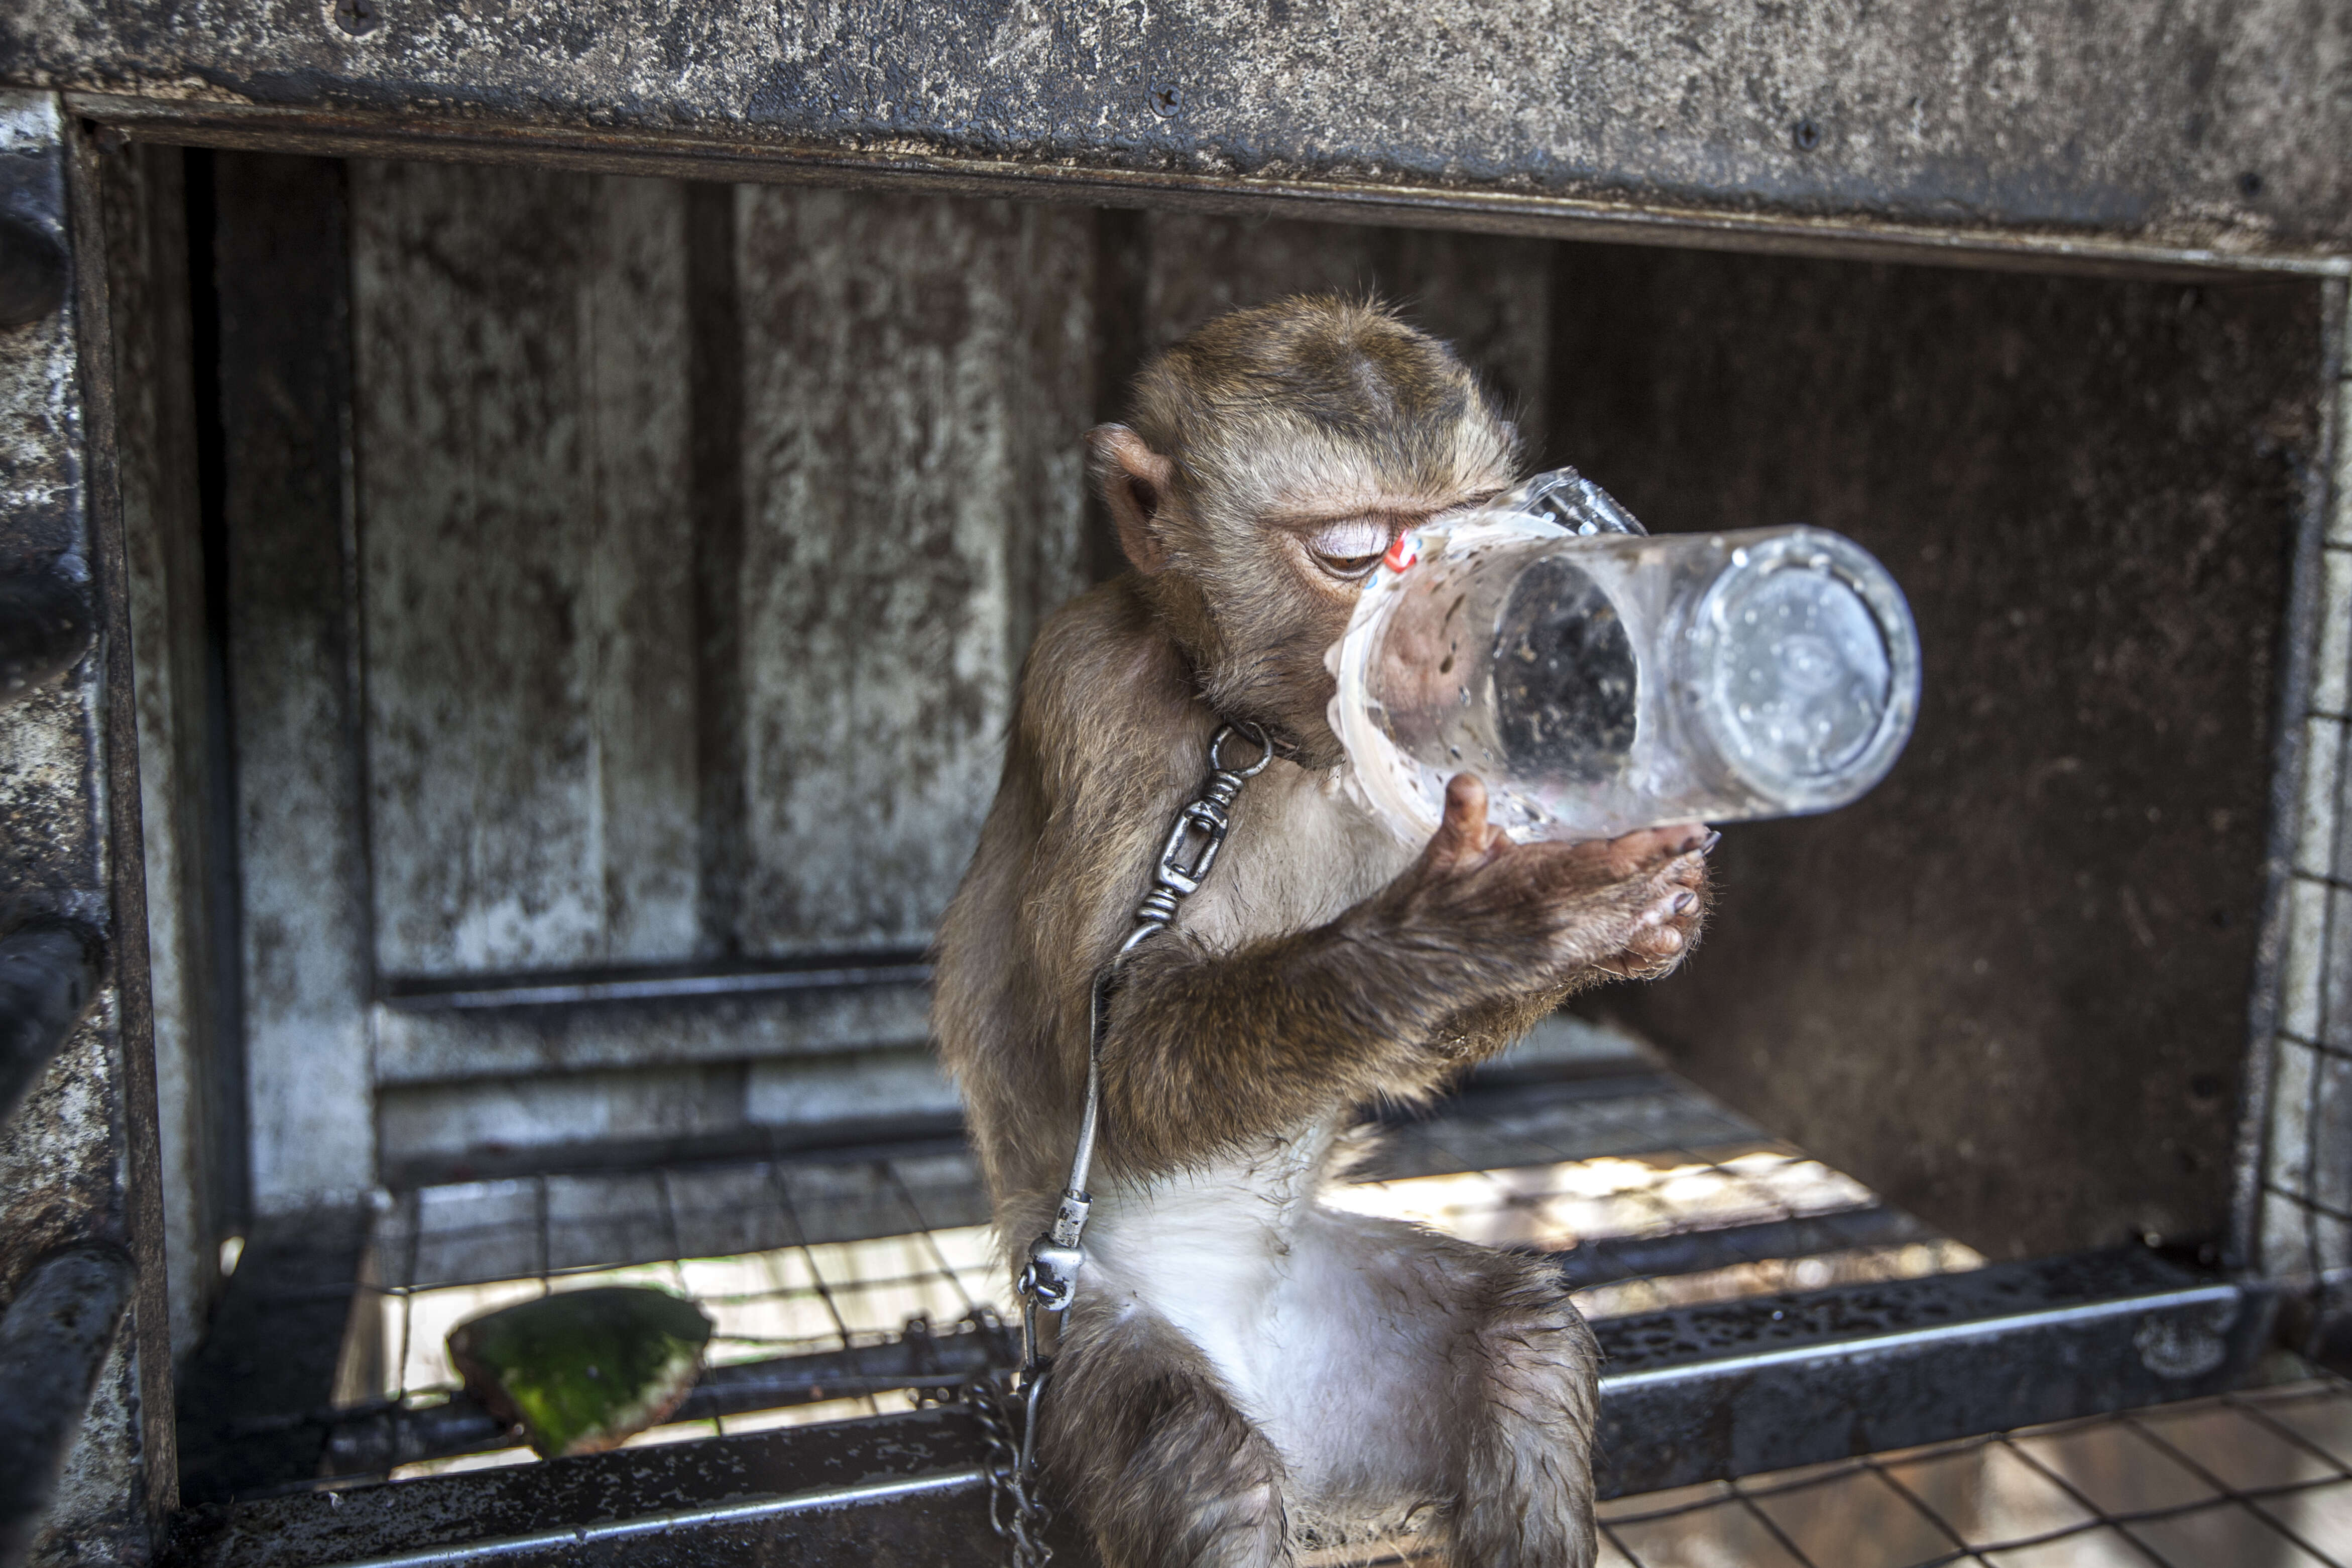 Baby macaque drinking out of plastic cup